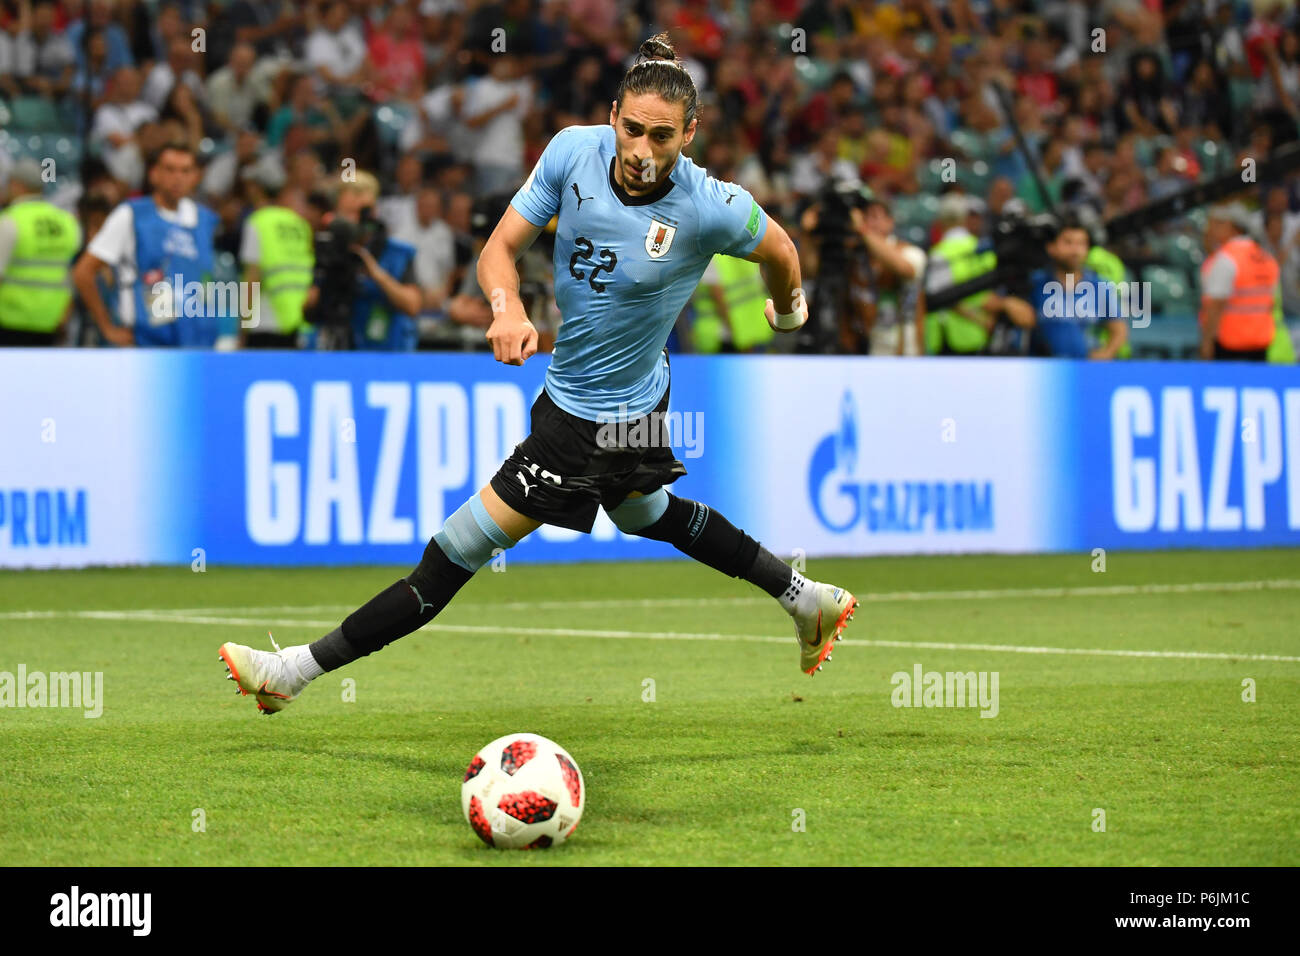 Martin CACERES (URU), Action, Single Action, Frame, Cut Out, Full Body, Whole Figure. Uruguay (URU) - Portugal (POR) 2-1, Round of 16, Round of 16, Game 49, on 30.06.2018 in SOCHI, Fisht Olympic Stadium. Football World Cup 2018 in Russia from 14.06. - 15.07.2018. | usage worldwide Stock Photo